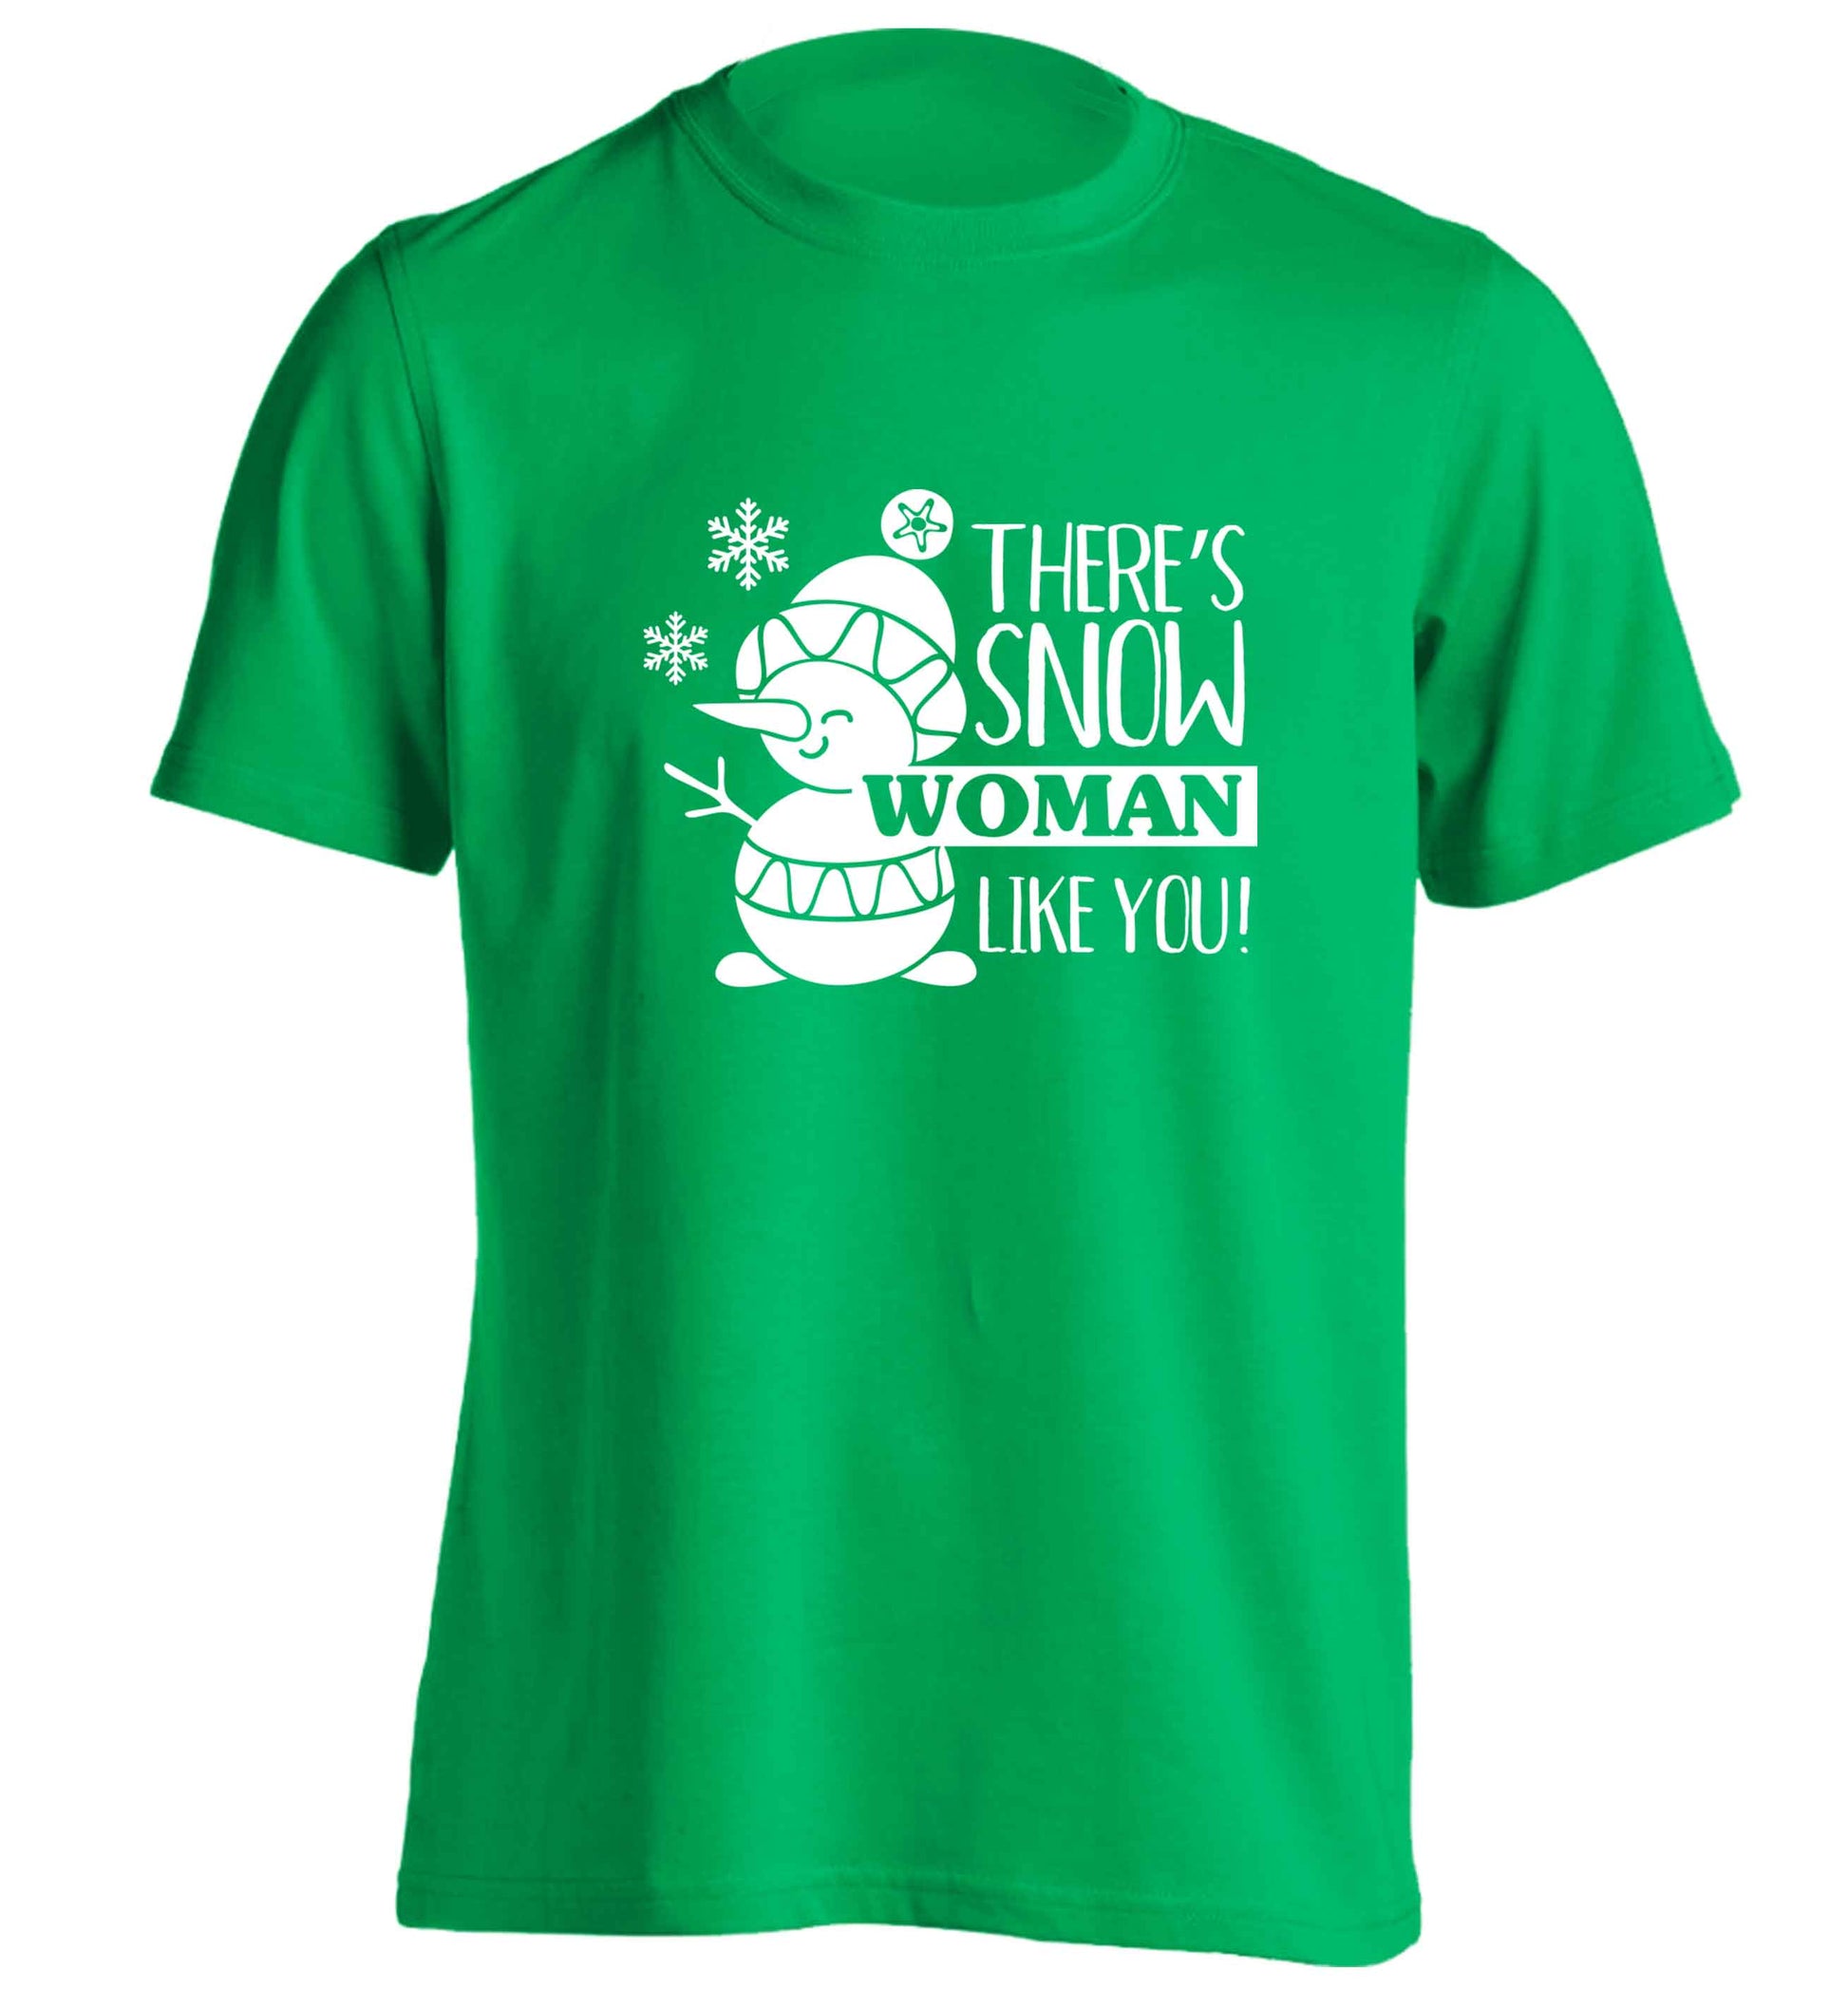 There's snow woman like you adults unisex green Tshirt 2XL